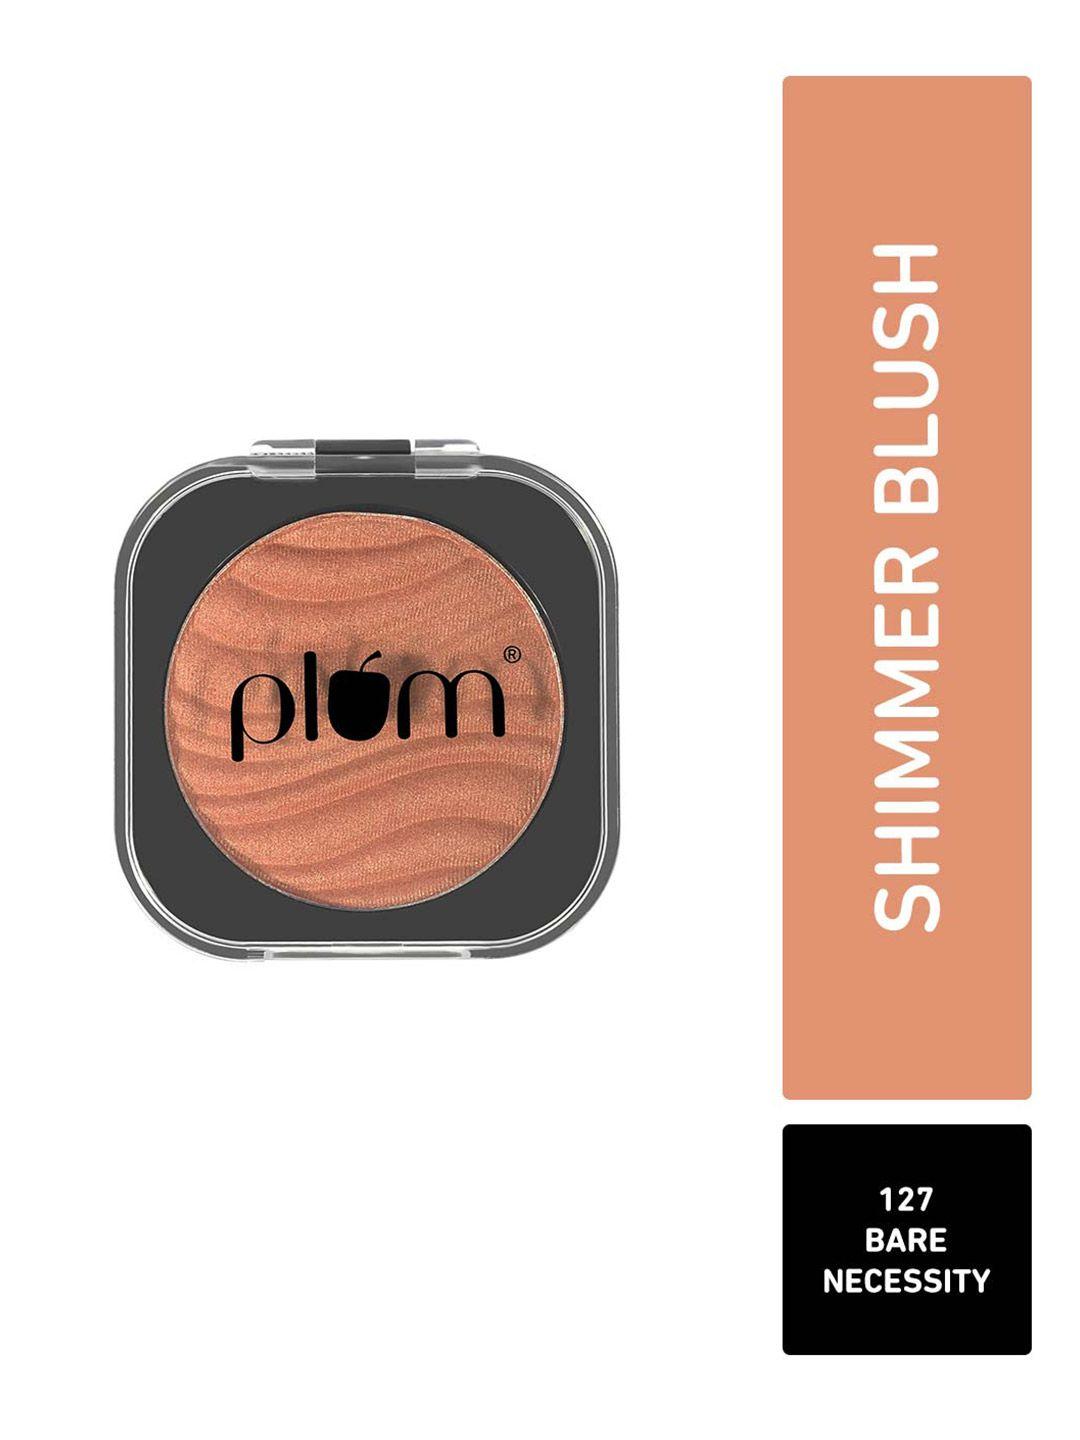 plum cheek-a-boo highly-pigmented shimmer blush 4.5g - bare necessity 127